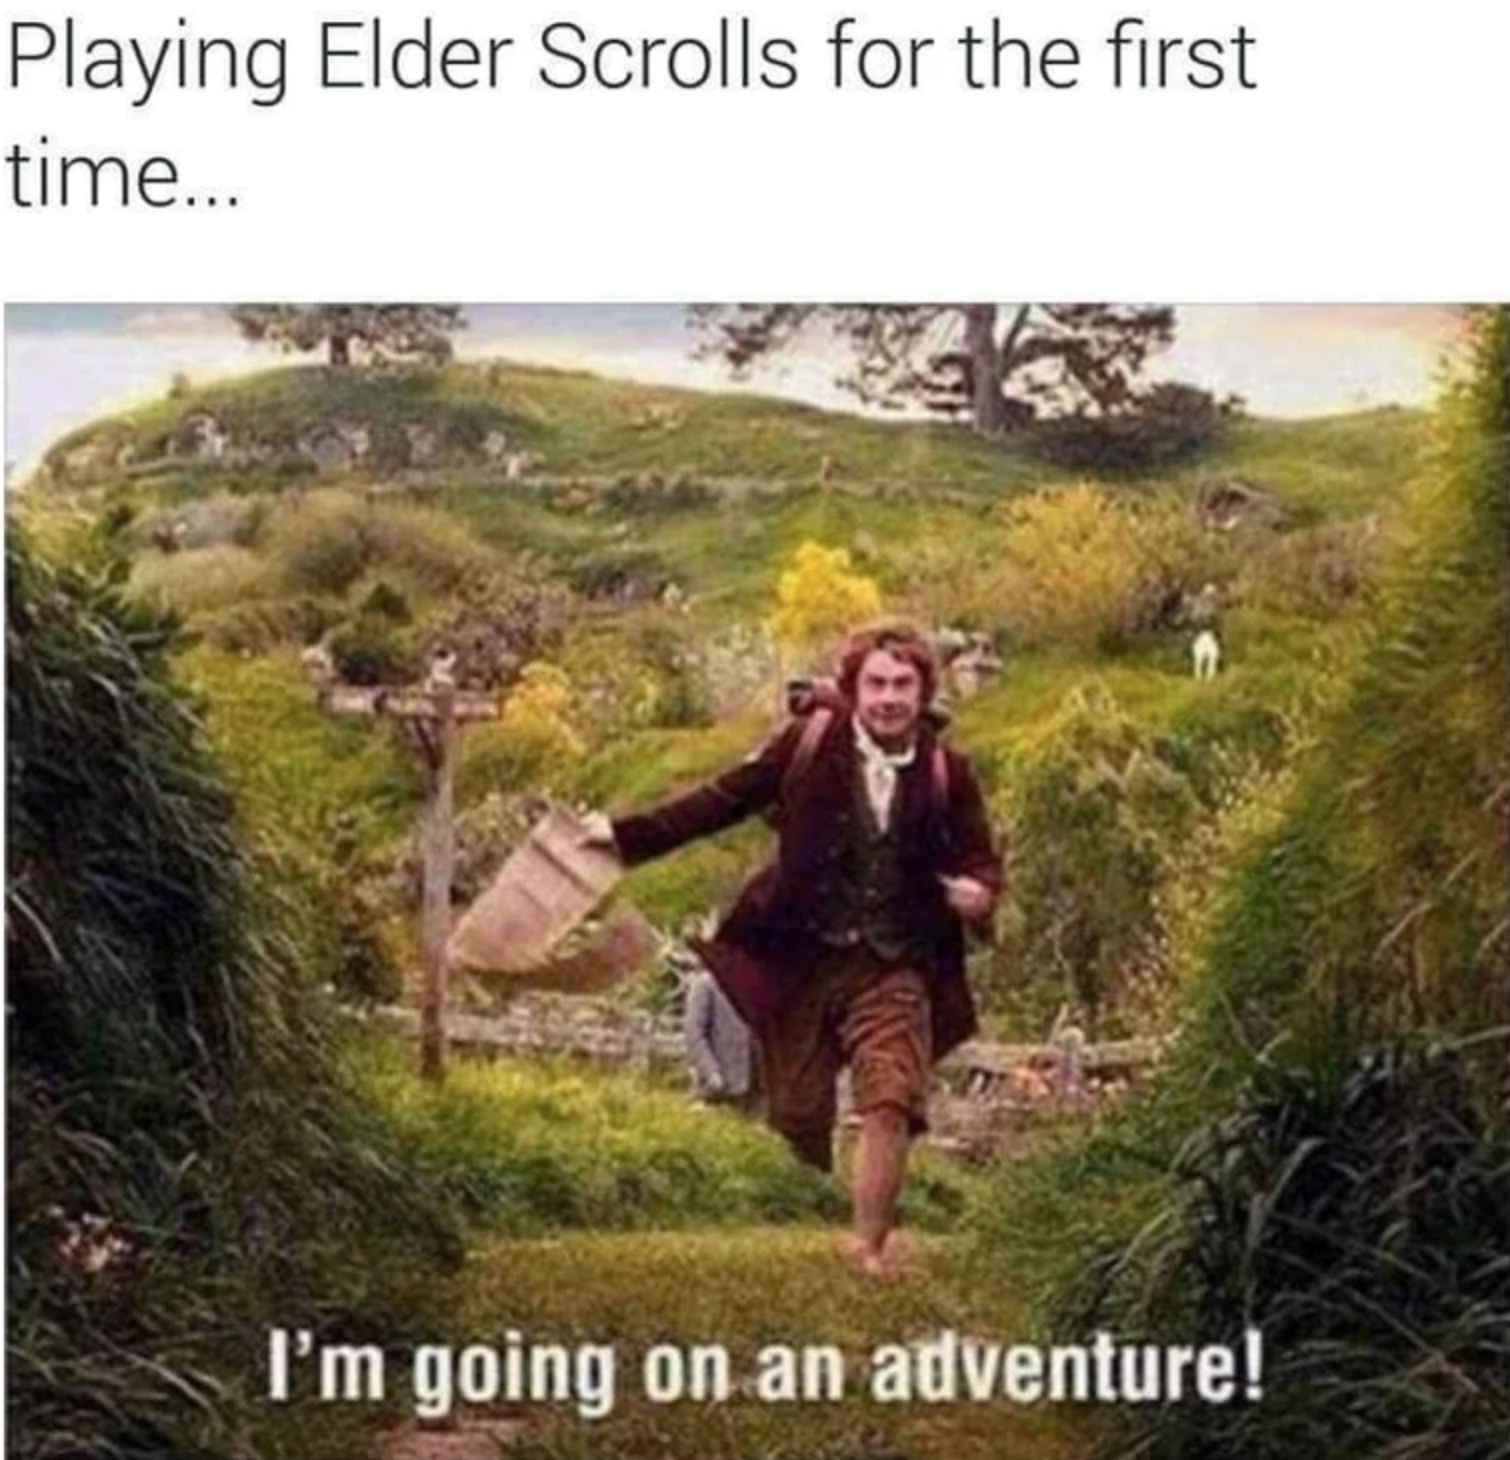 hobbit adventure meme - Playing Elder Scrolls for the first time... I'm going on an adventure!